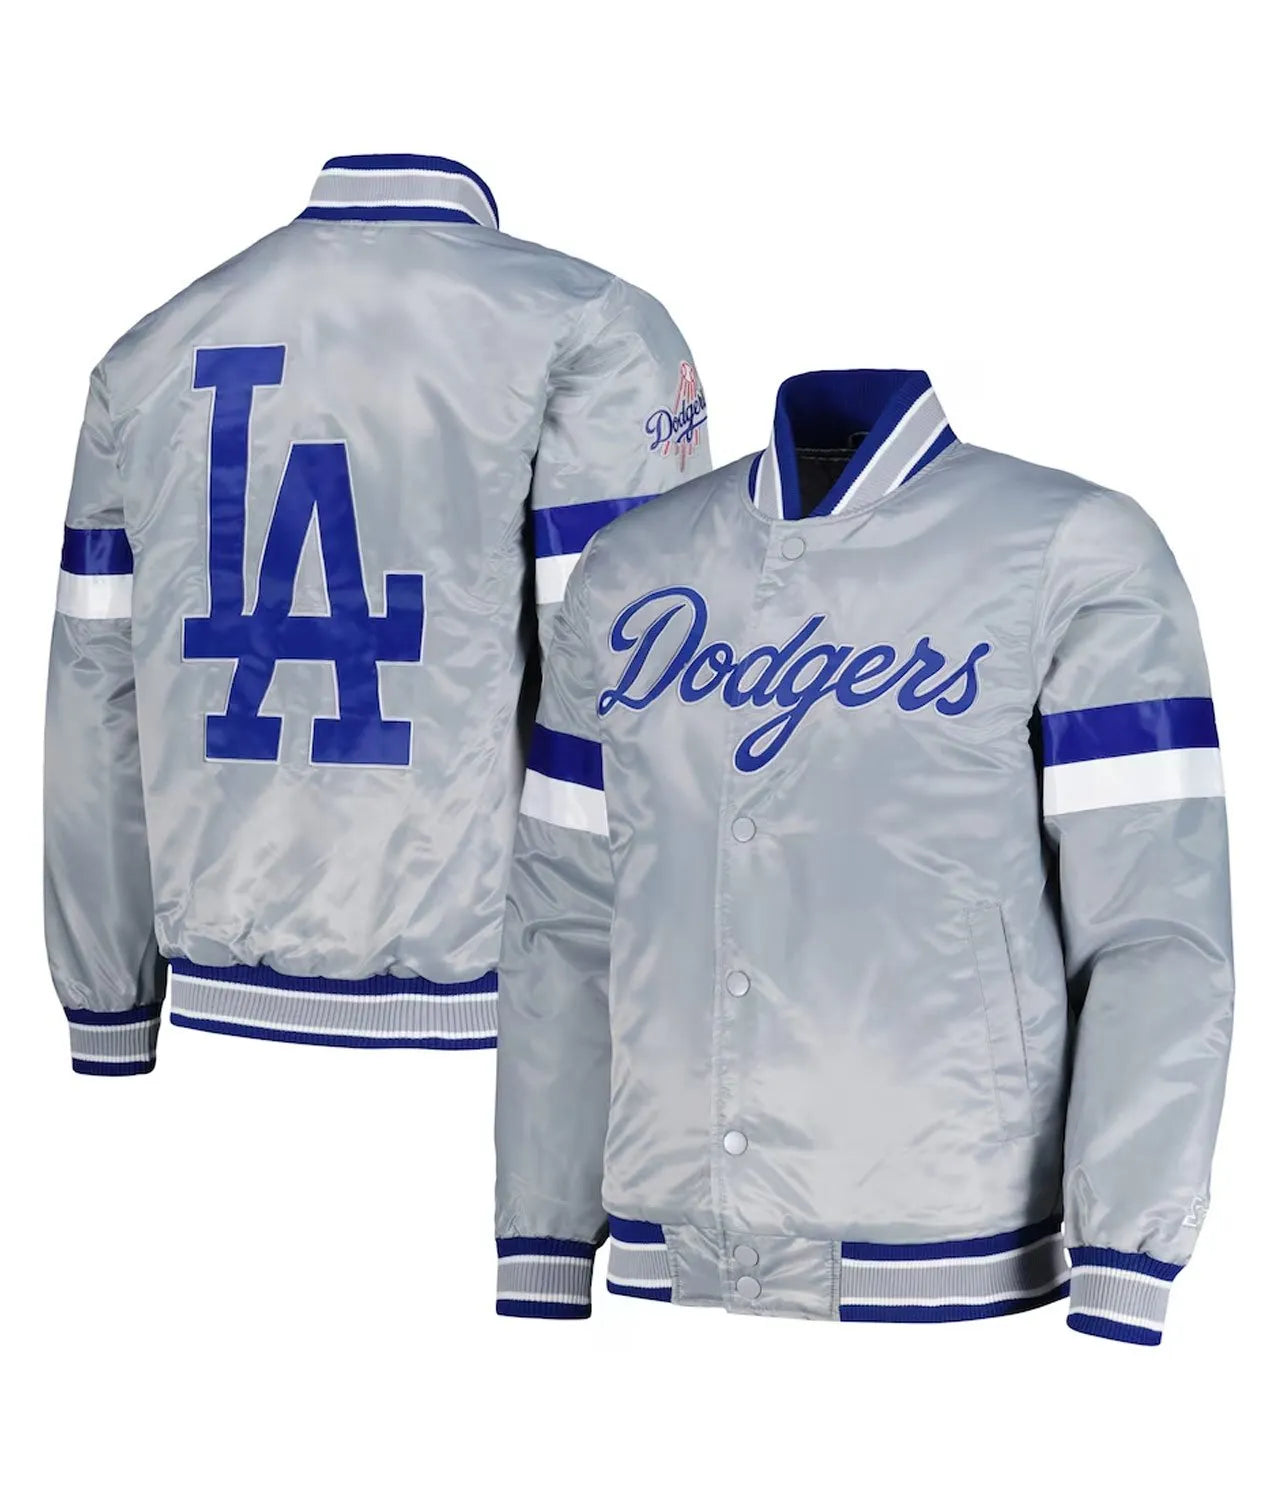 LA Dodgers Home Game Gray Satin Jacket Rated 4.50 out of 5 based on 2customer ratings